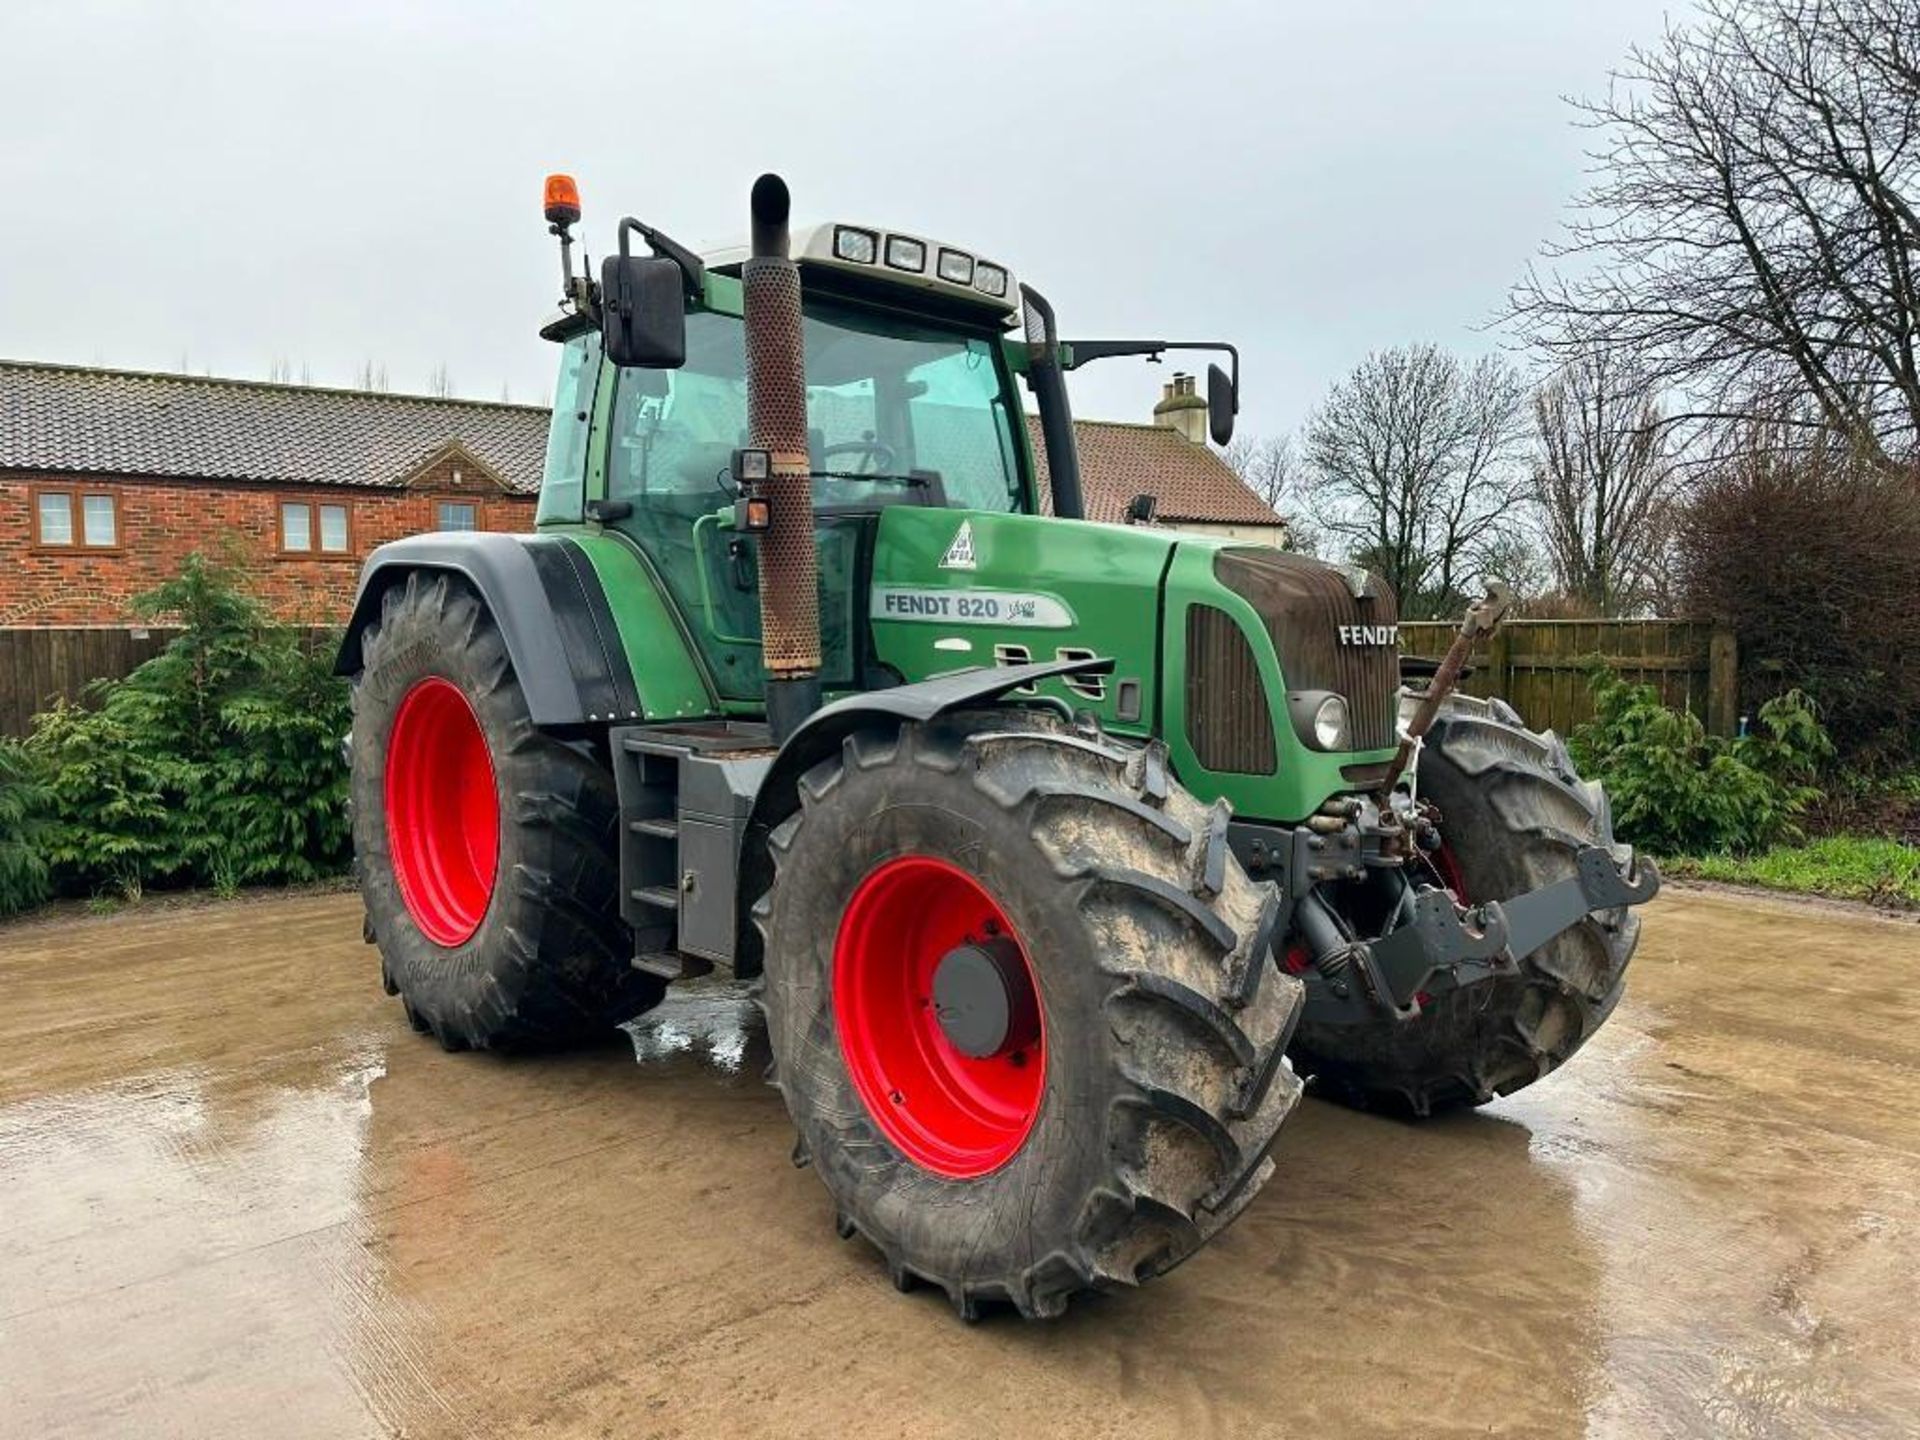 2010 Fendt 820 Vario TMS tractor, 4wd, front linkage, 4No spool valves, Bill Bennett pick up hitch. - Image 3 of 21